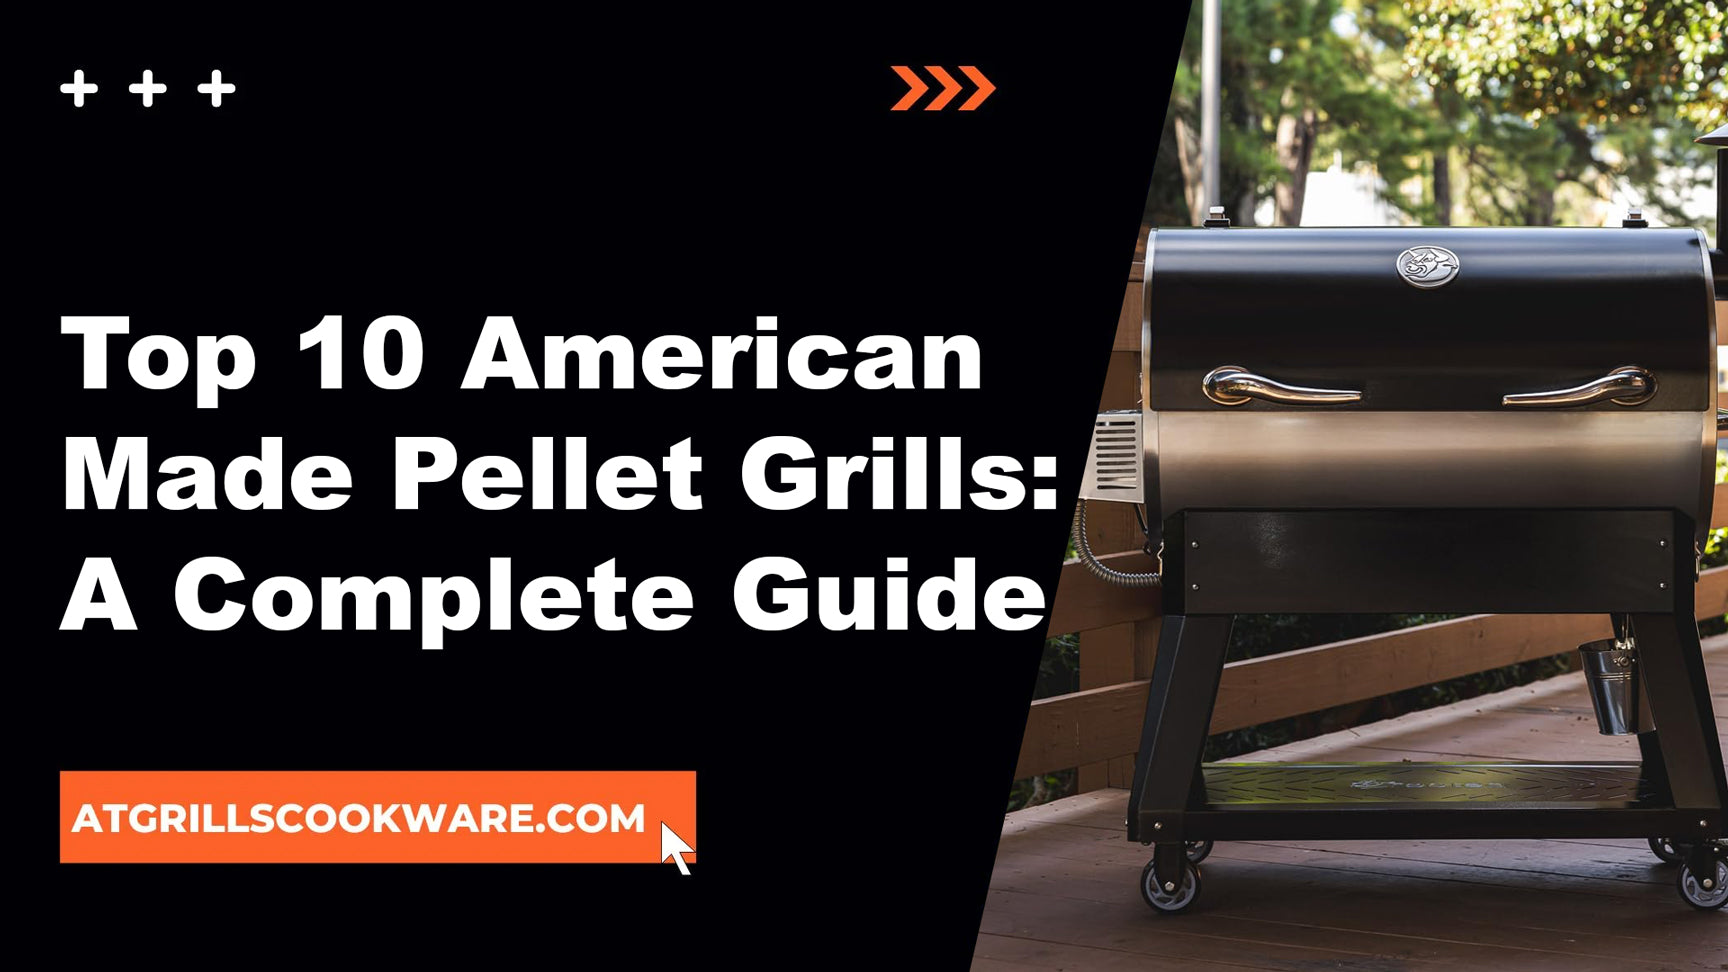 Top 10 American Made Pellet Grills: A Complete Guide